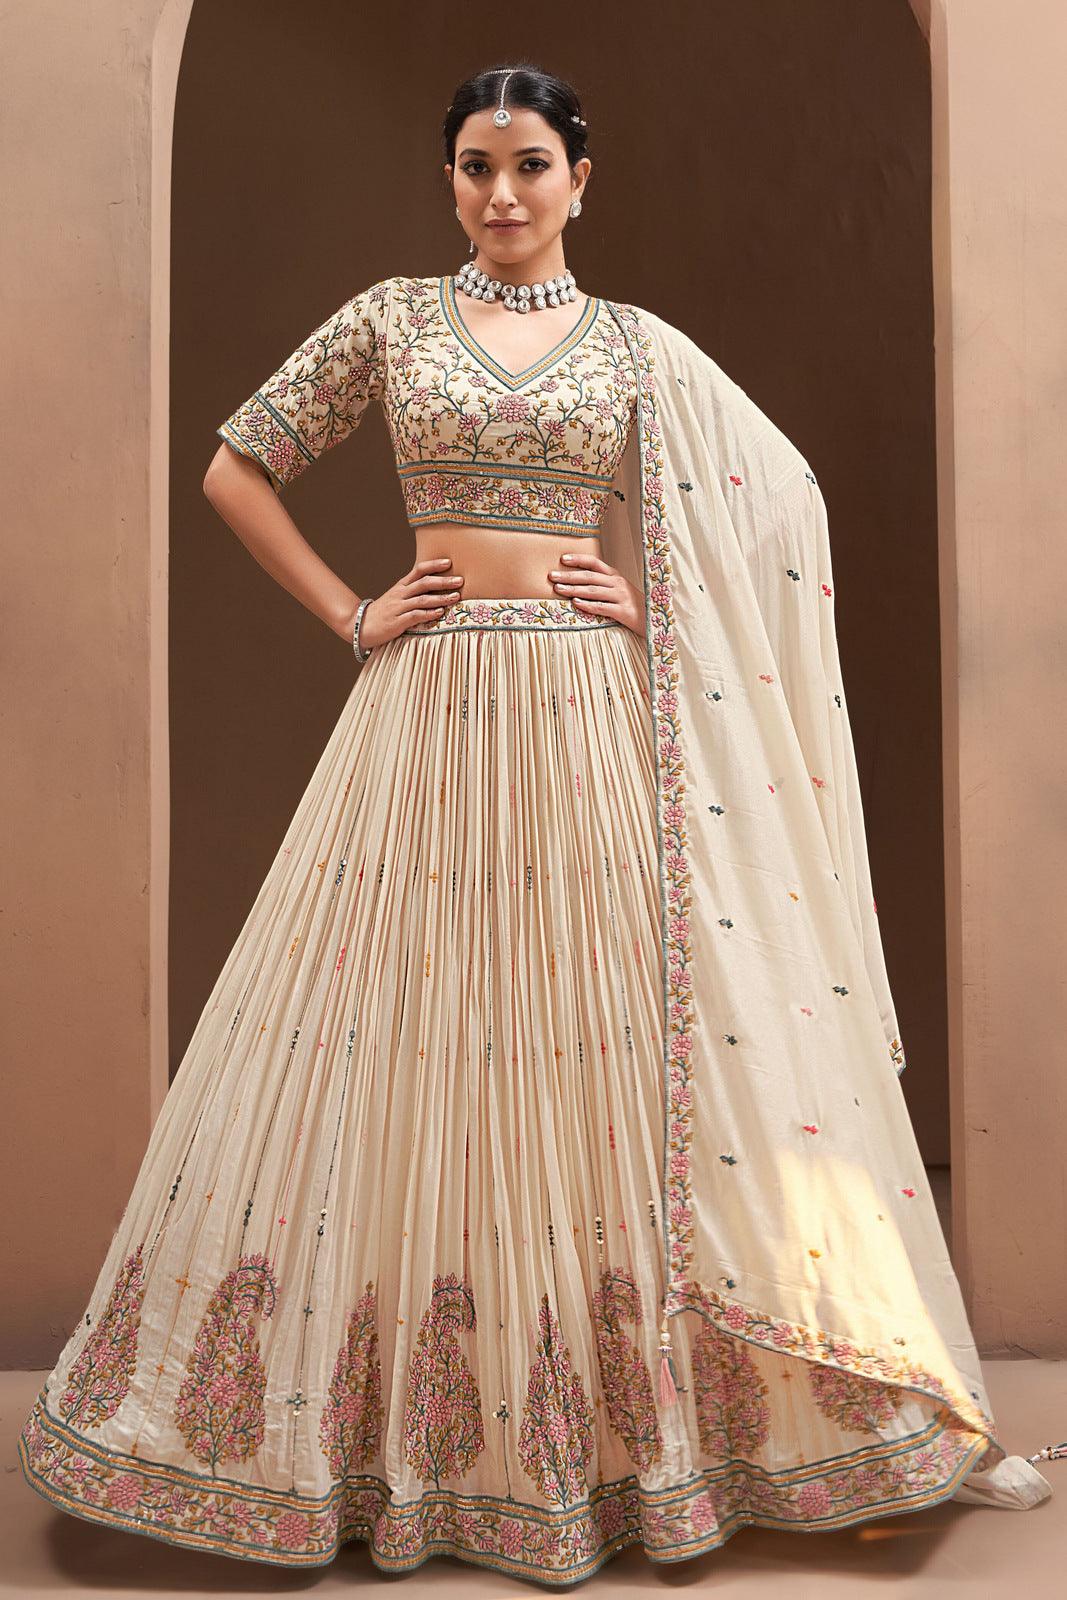 New Collection of Simple Lehengas for Weddings and Special Occasions